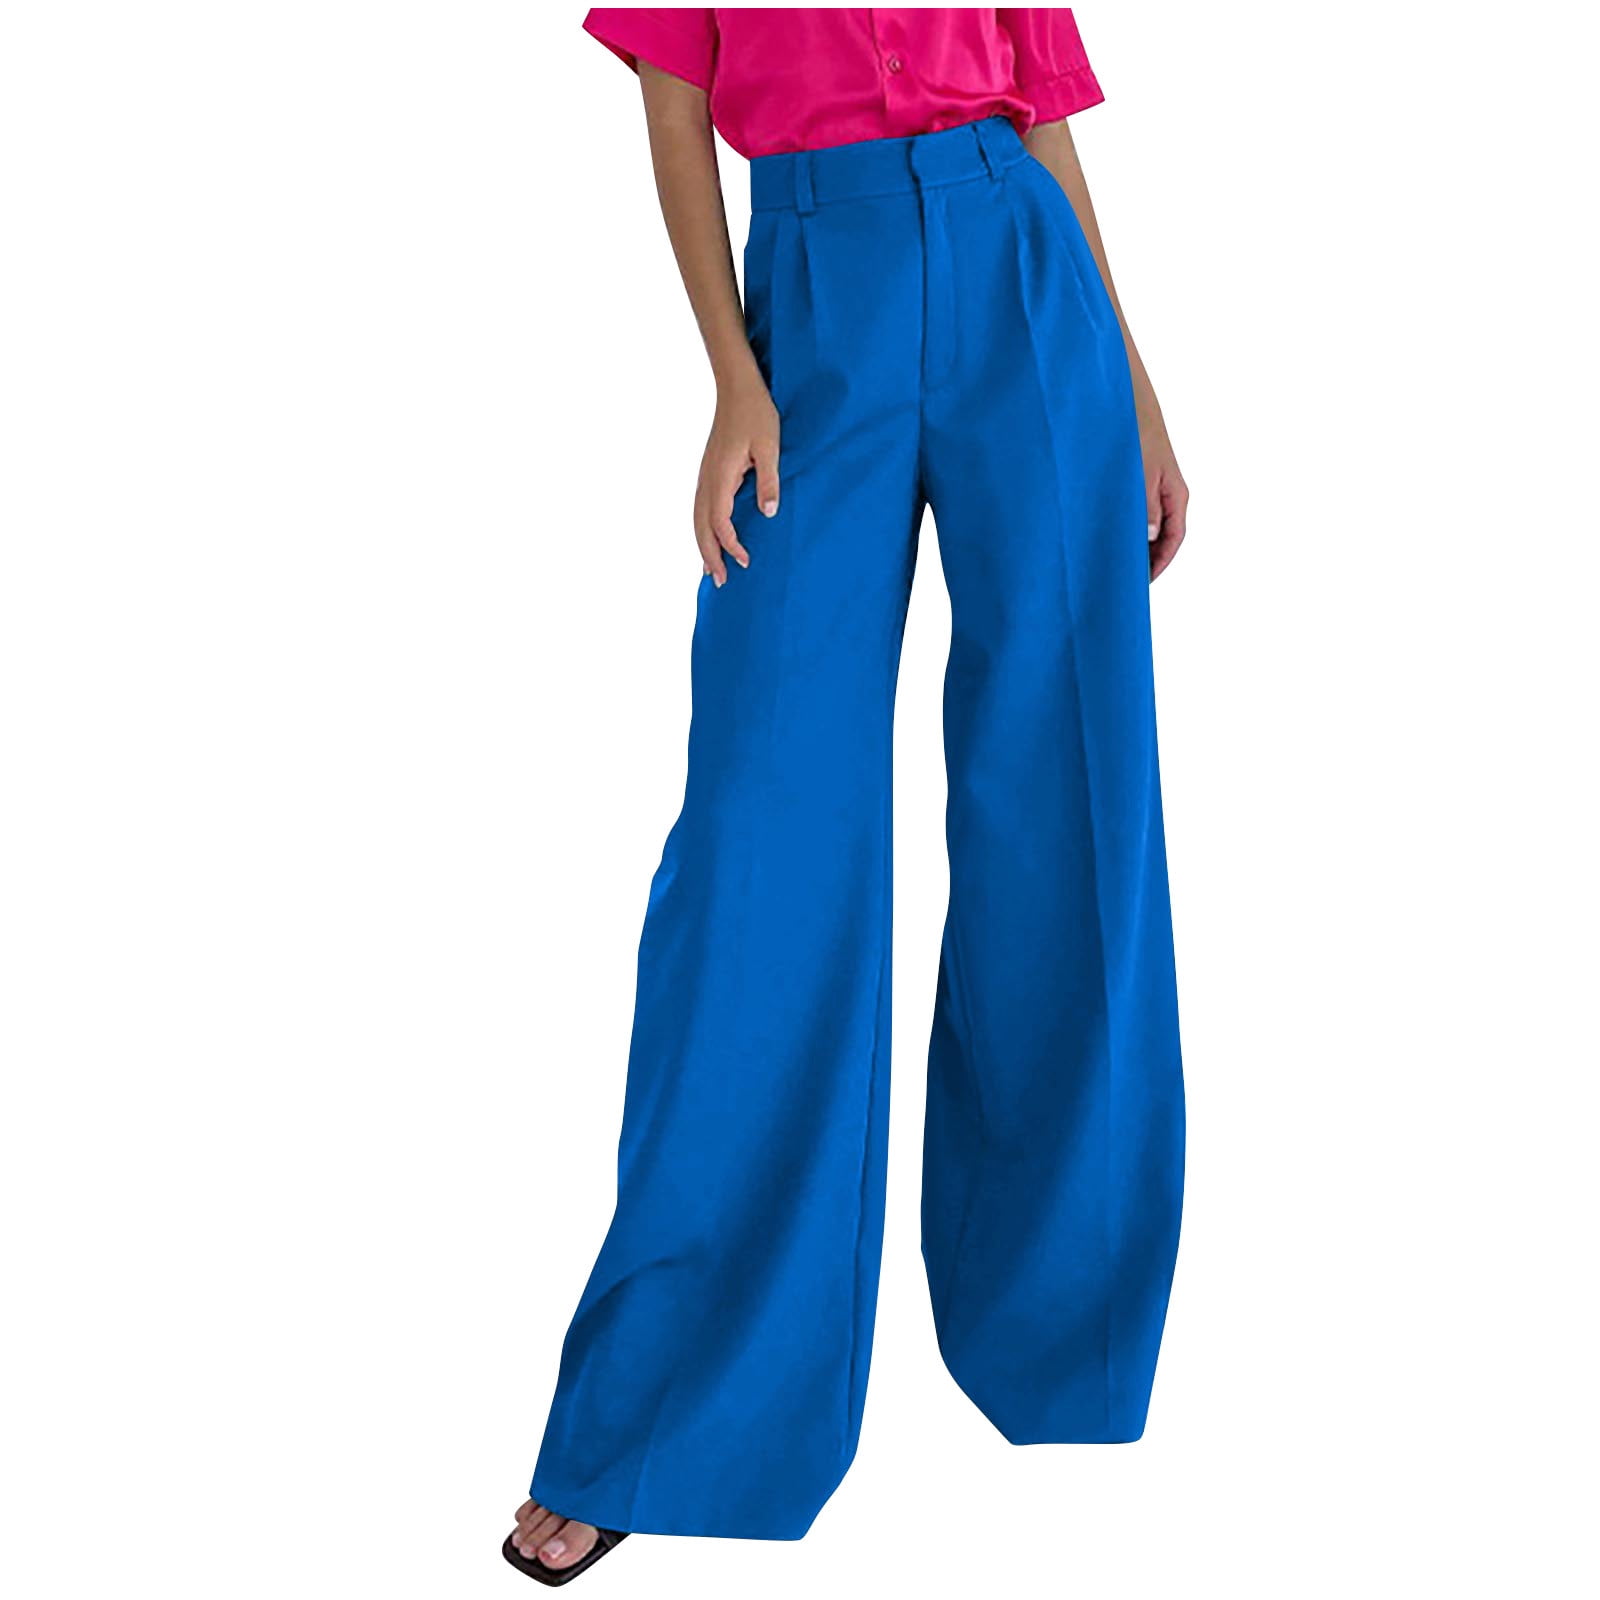 Solid Stretchy Flare Leg Pants, Casual High Waist Pants, Women's Clothing